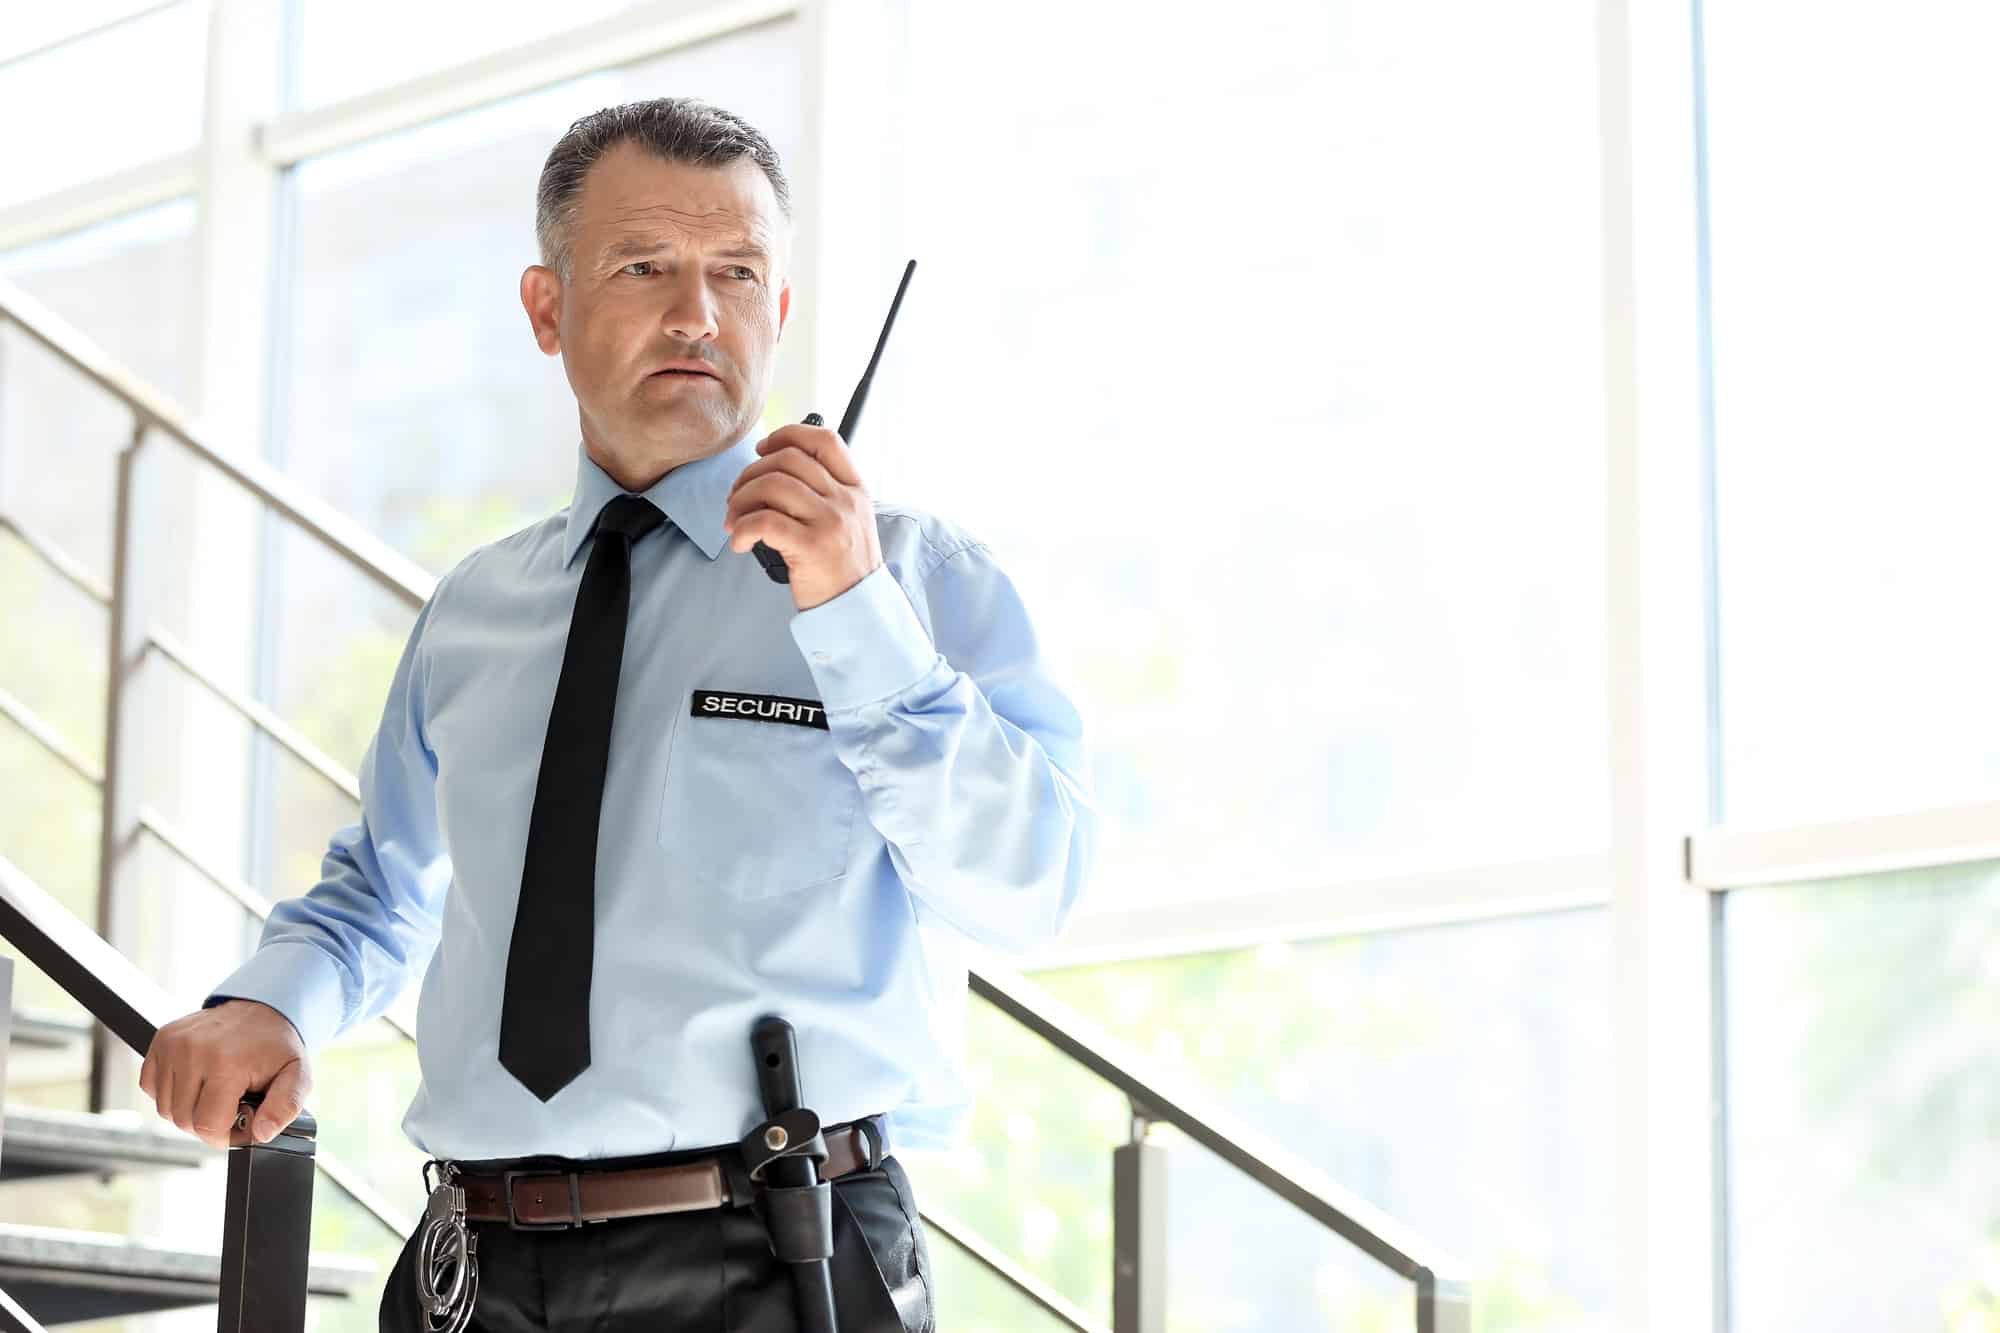 Hiring Security Guard Services: Common Mistakes and How to Avoid Them